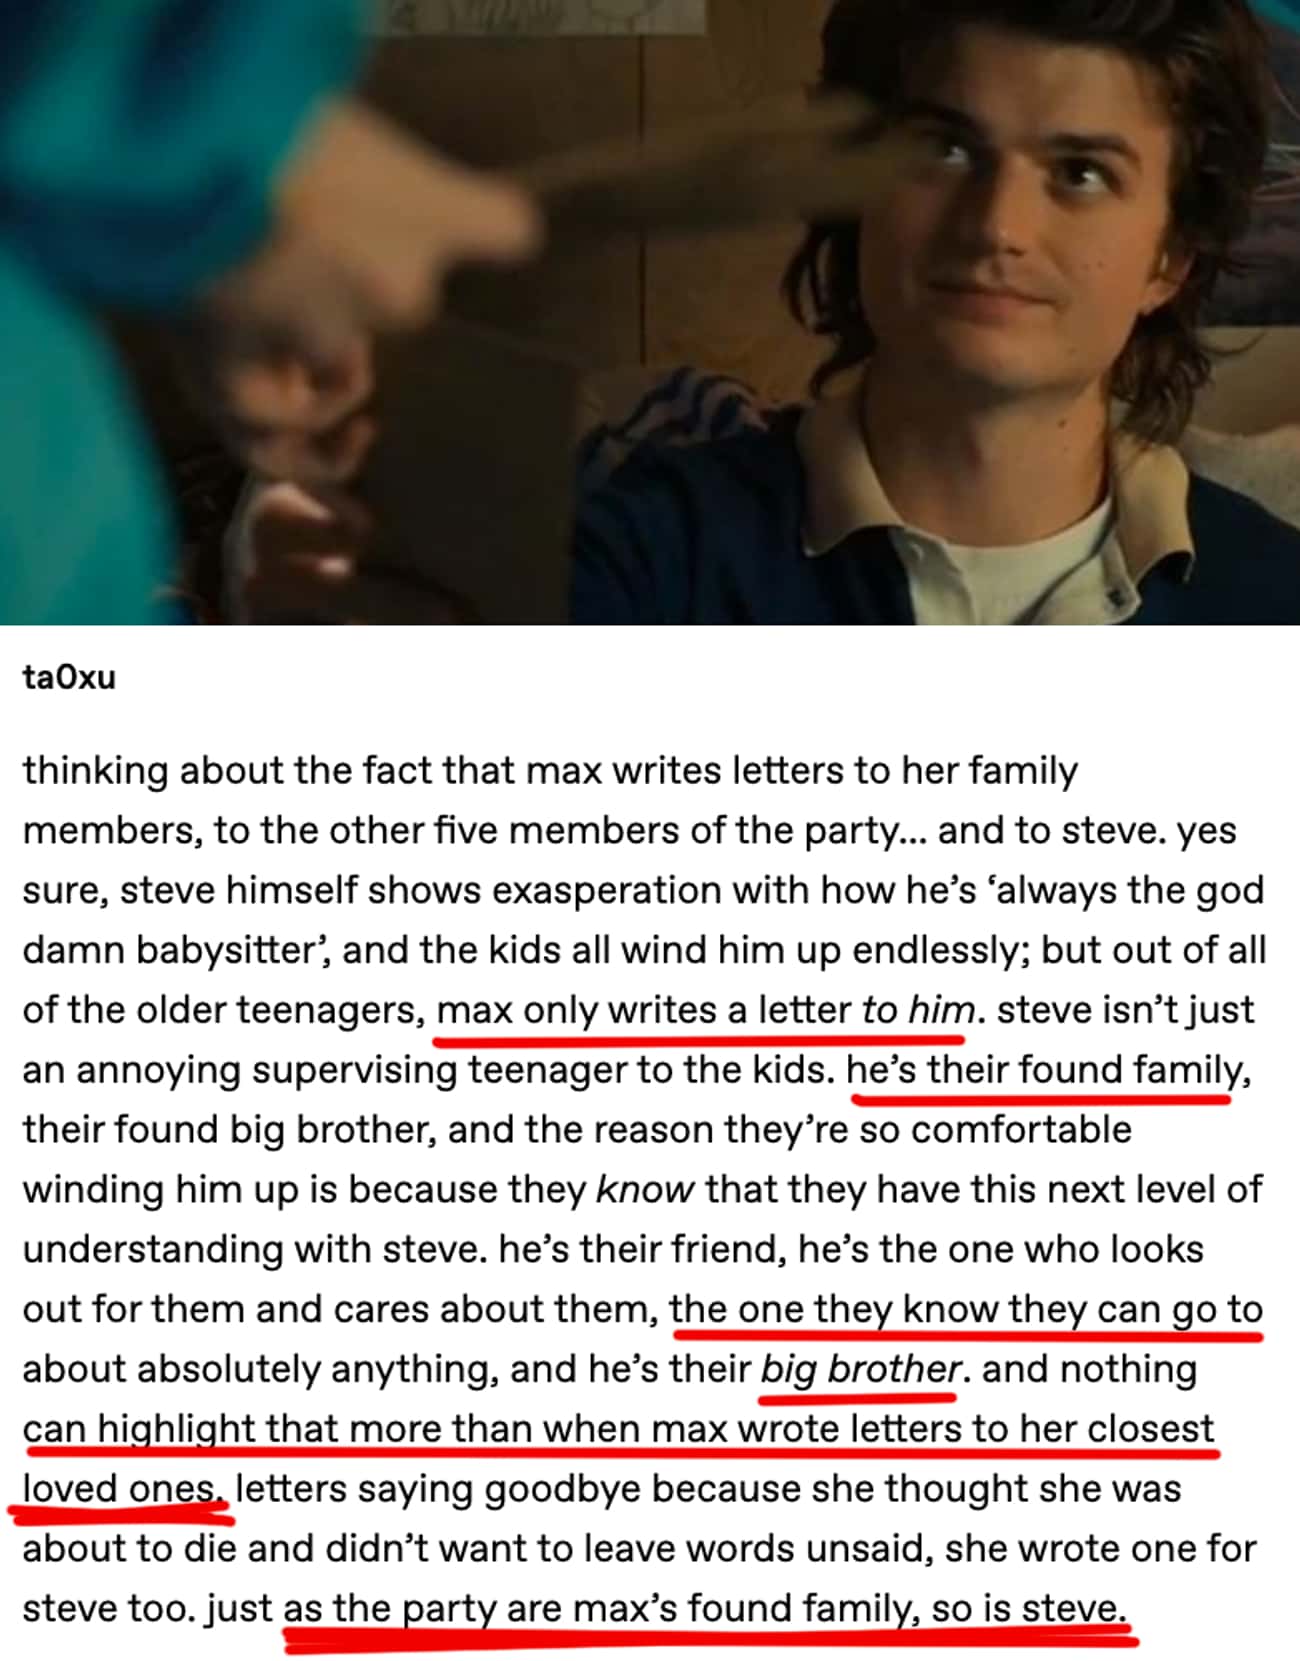 Why The Letter To Steve Is So Important